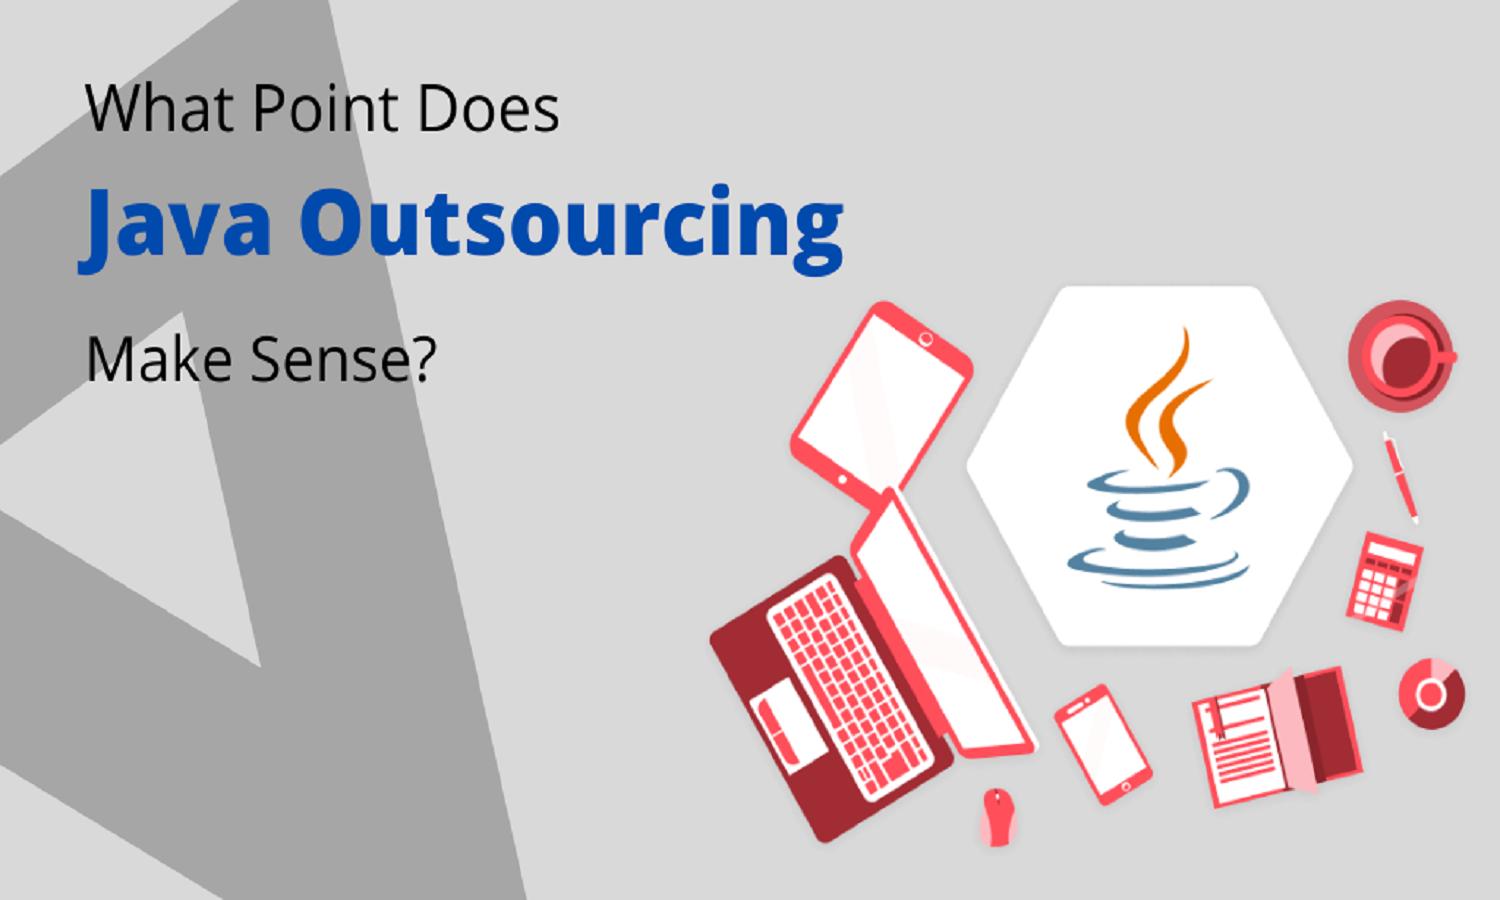 At What Point Does Java Outsourcing Make Sense?